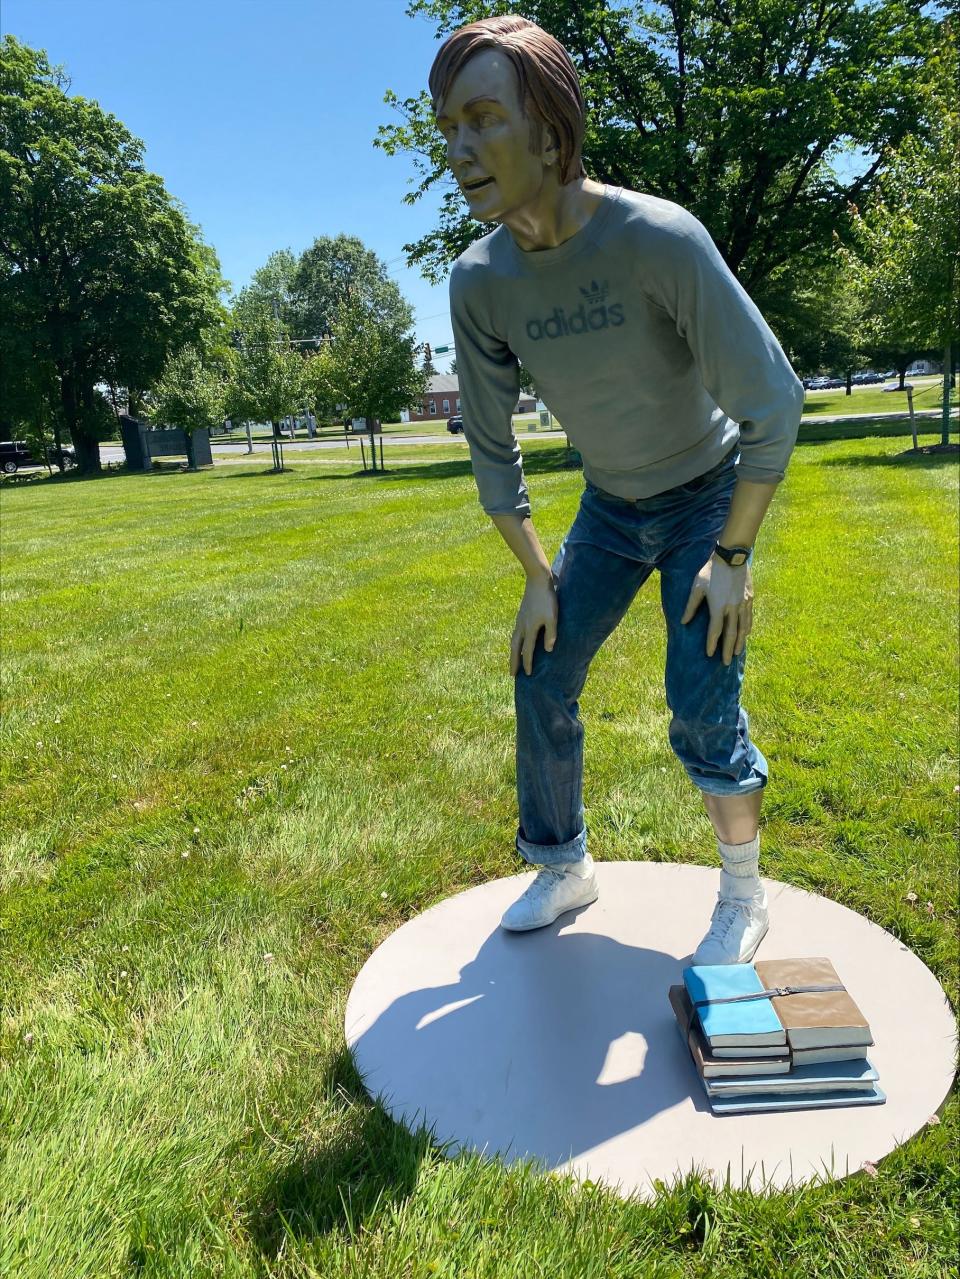 A second "Time Out" sculpture by Seward Johnson is also displayed at Veterans Square in Lower Makefield.